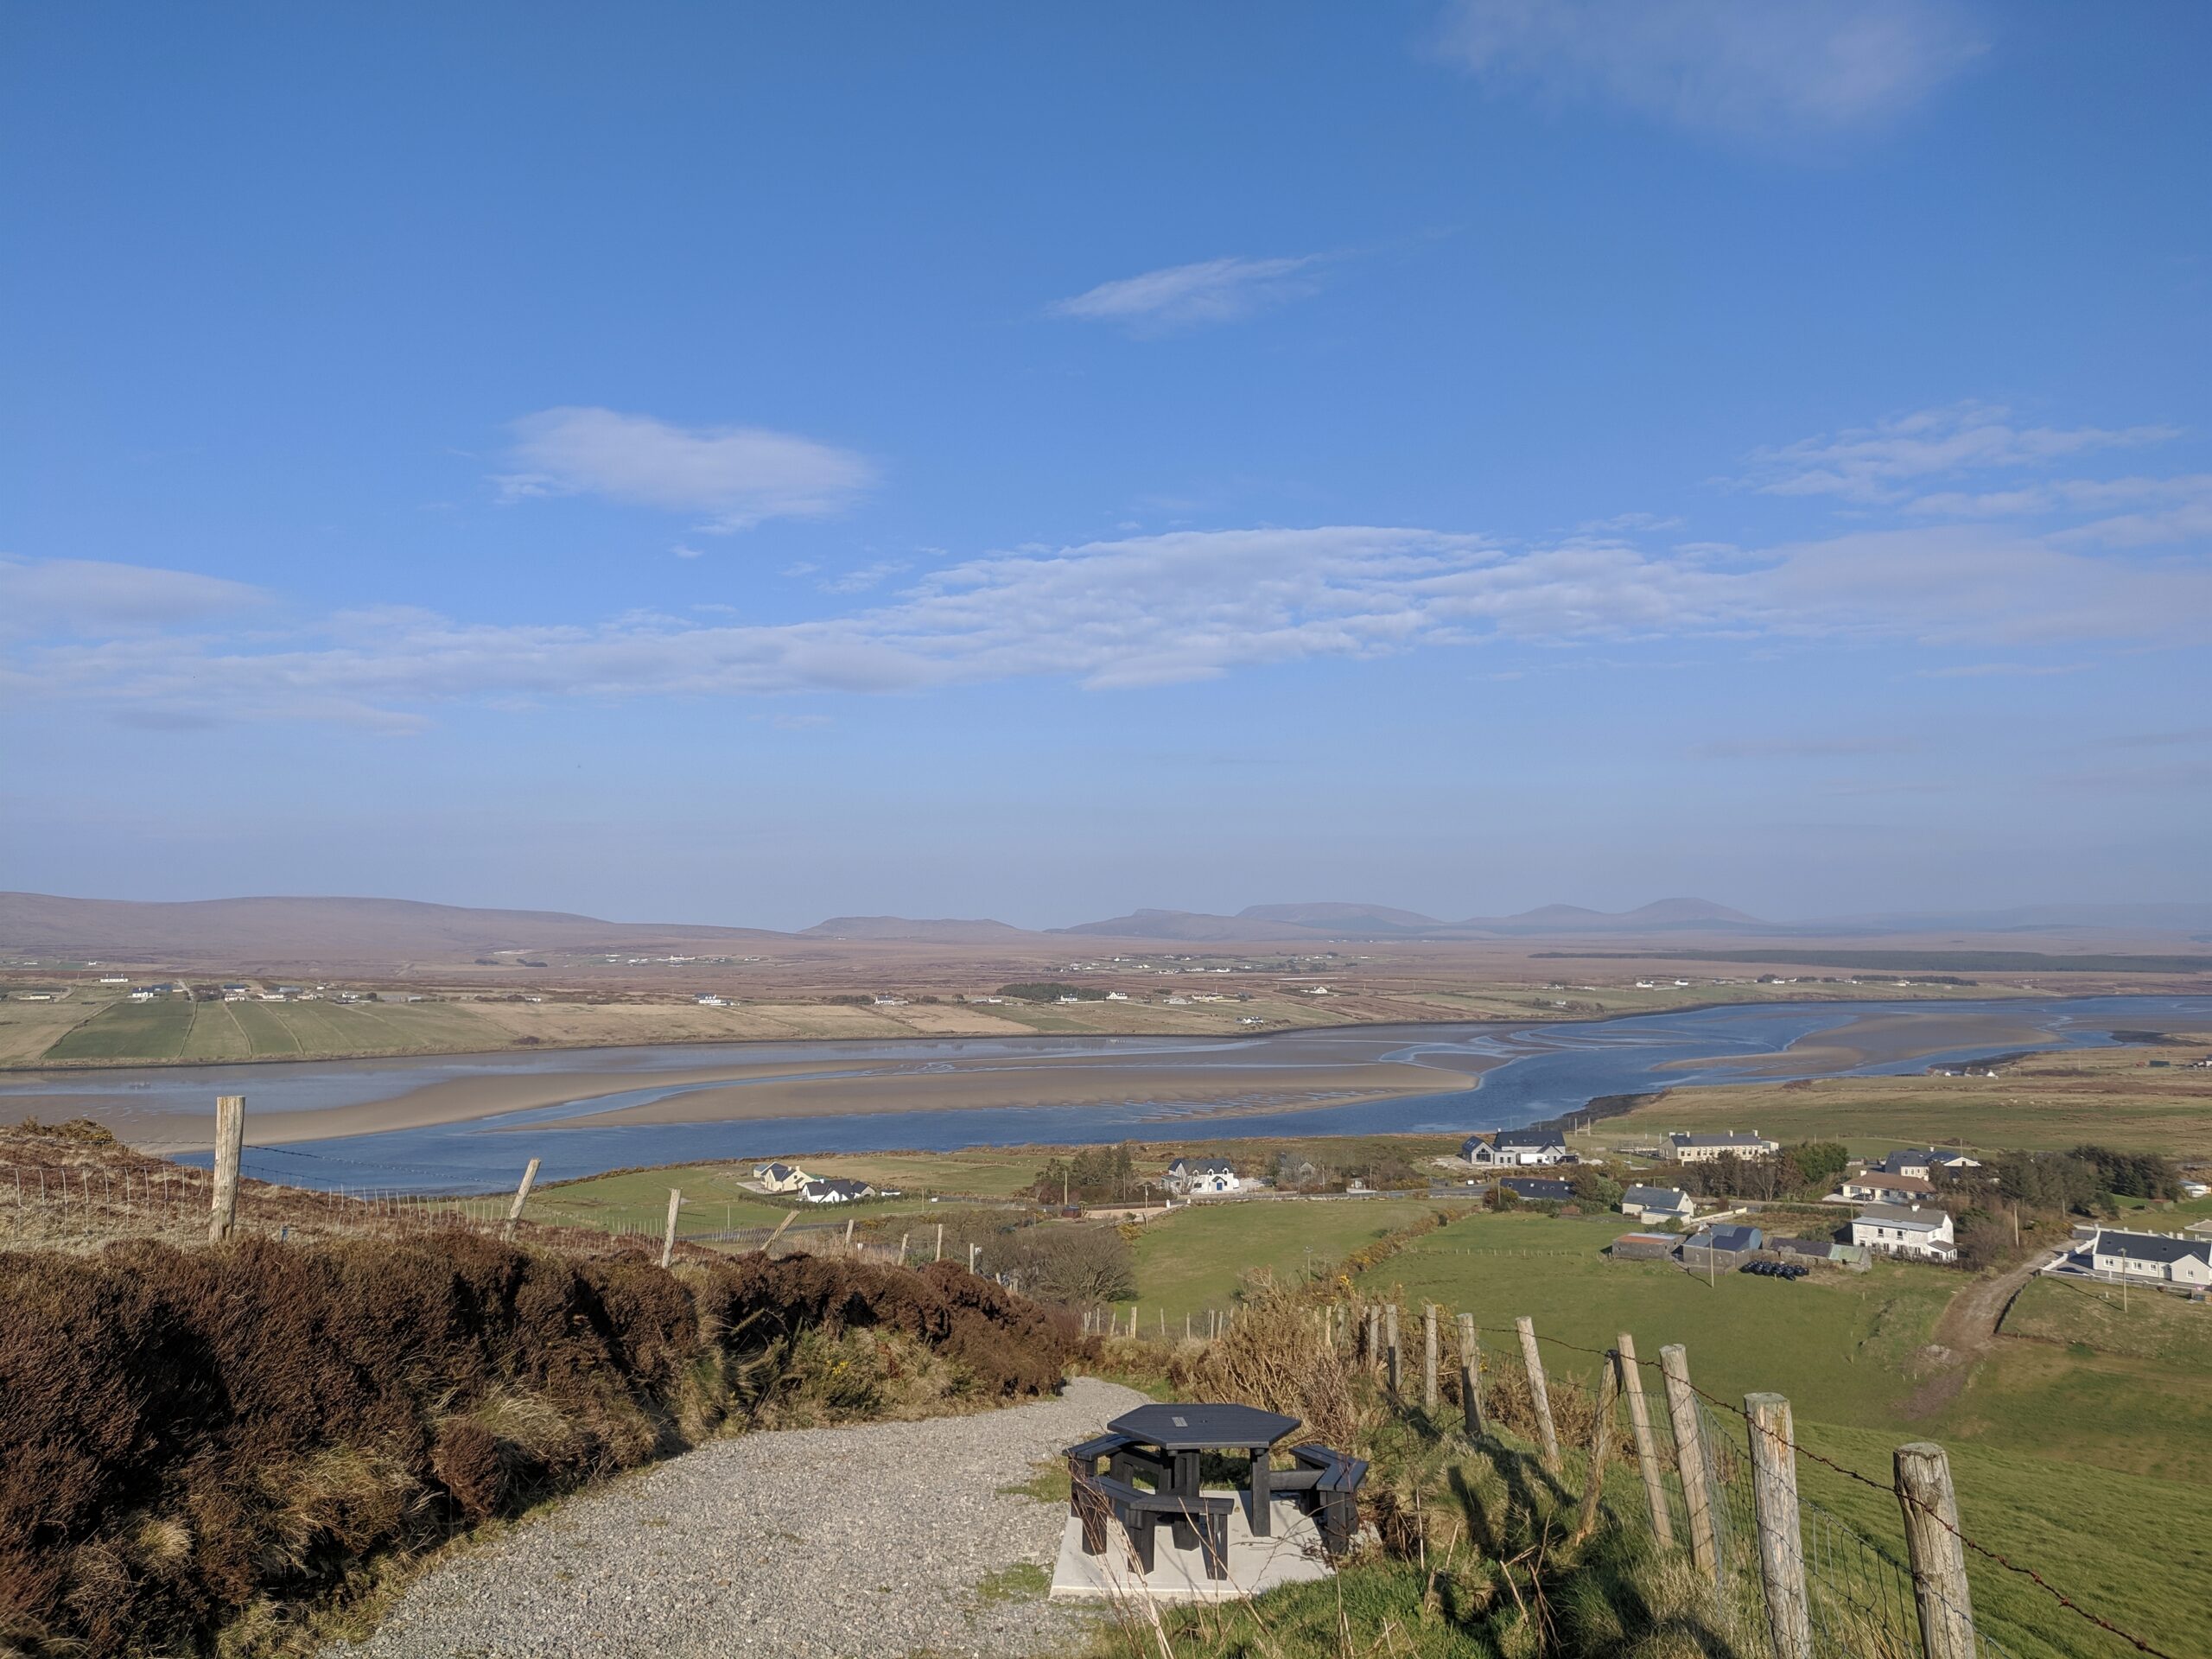 View from the hill over Scruwaddacon Bay